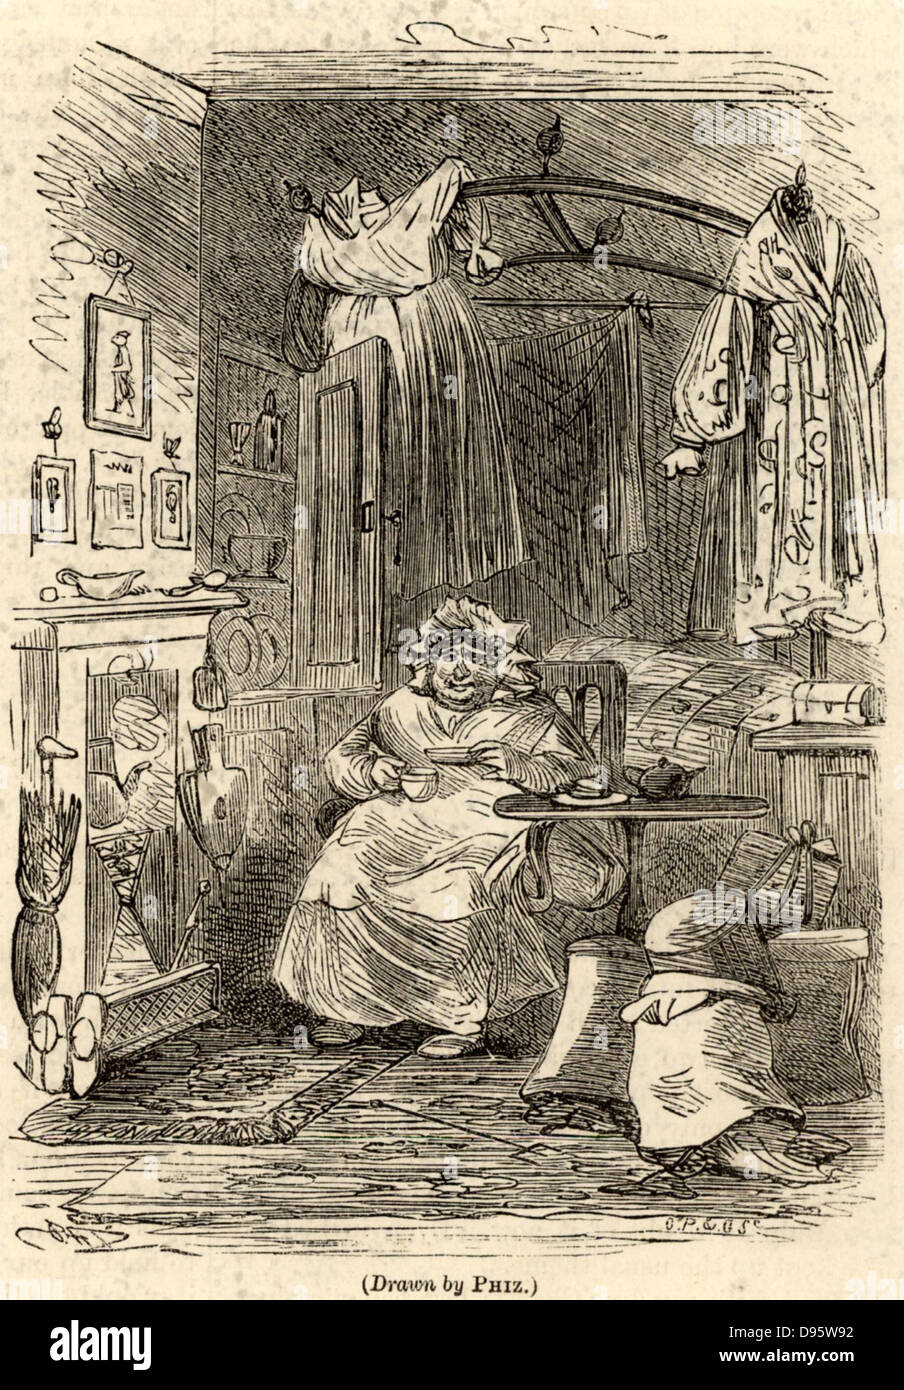 Sarah Gamp, a character from the novel  'Martin Chuzzlelwit' by Charles Dickens (1843-1844) drinking tea in her bed-sitting room. The name Gamp for an umbrella comes from her, and her umbrella is beside the fire. It is also a term for a midwife, which was one of her callings. Illustration by 'Phiz' (Hablot Knight Brown 1815-1892). Stock Photo